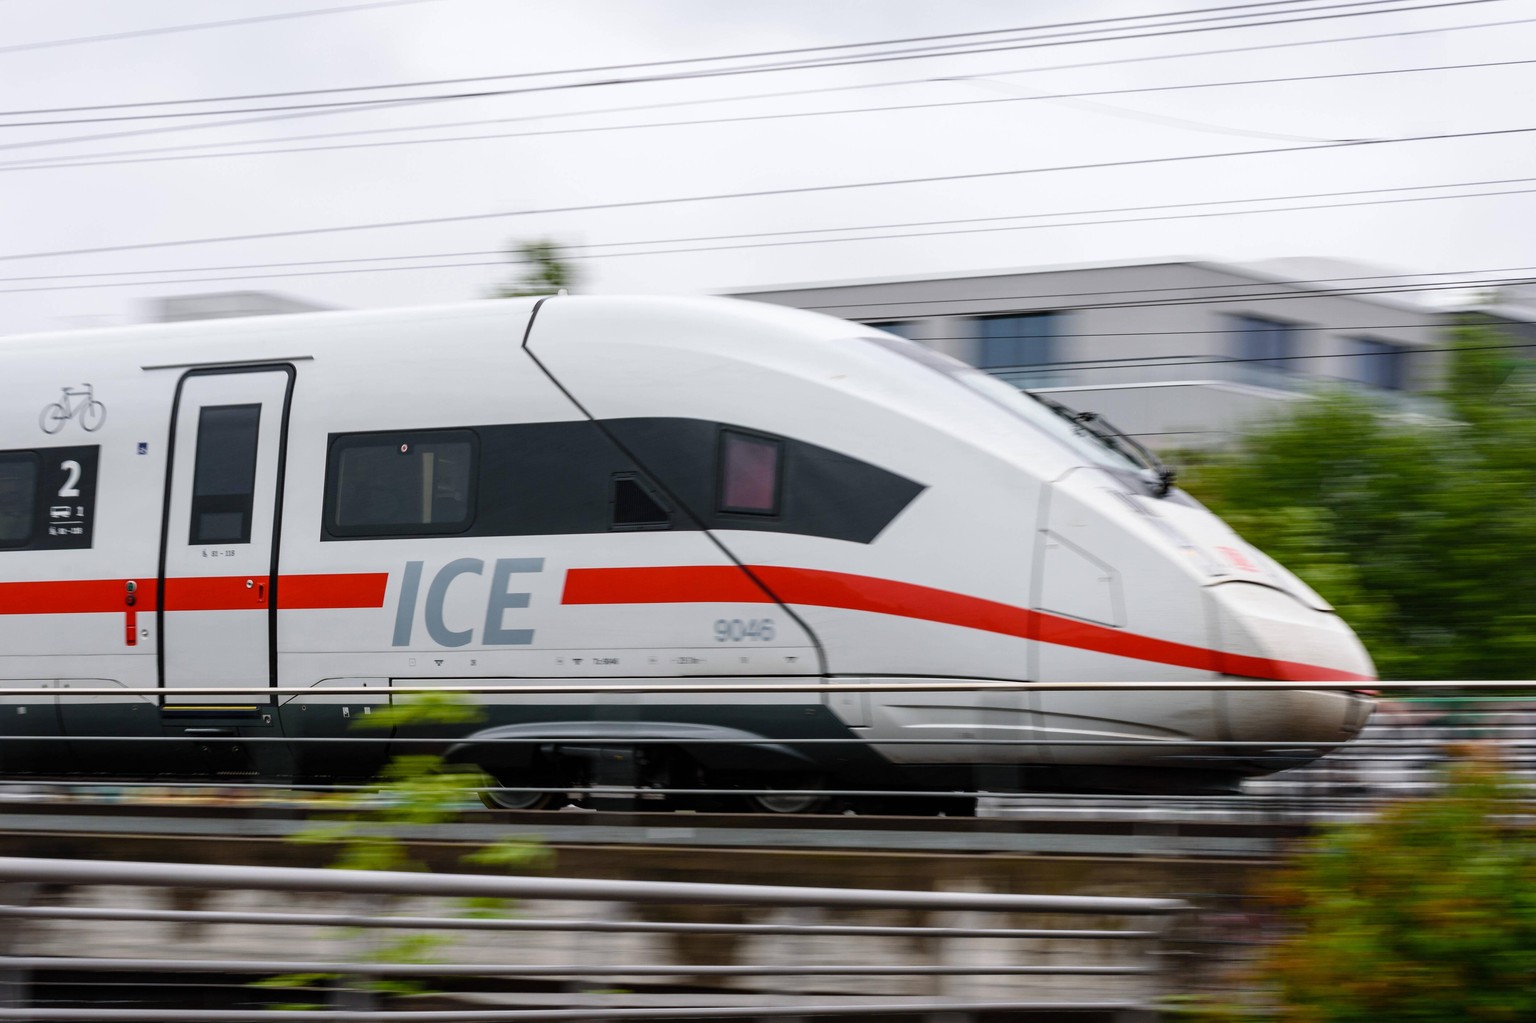 May 11, 2020, Berlin, Berlin, Germany: A German Intercity Express commonly known as ICE trainset can be seen in Berlin in rainy weather. Plans of the Ministry of Finance and the Ministry of Transport  ...